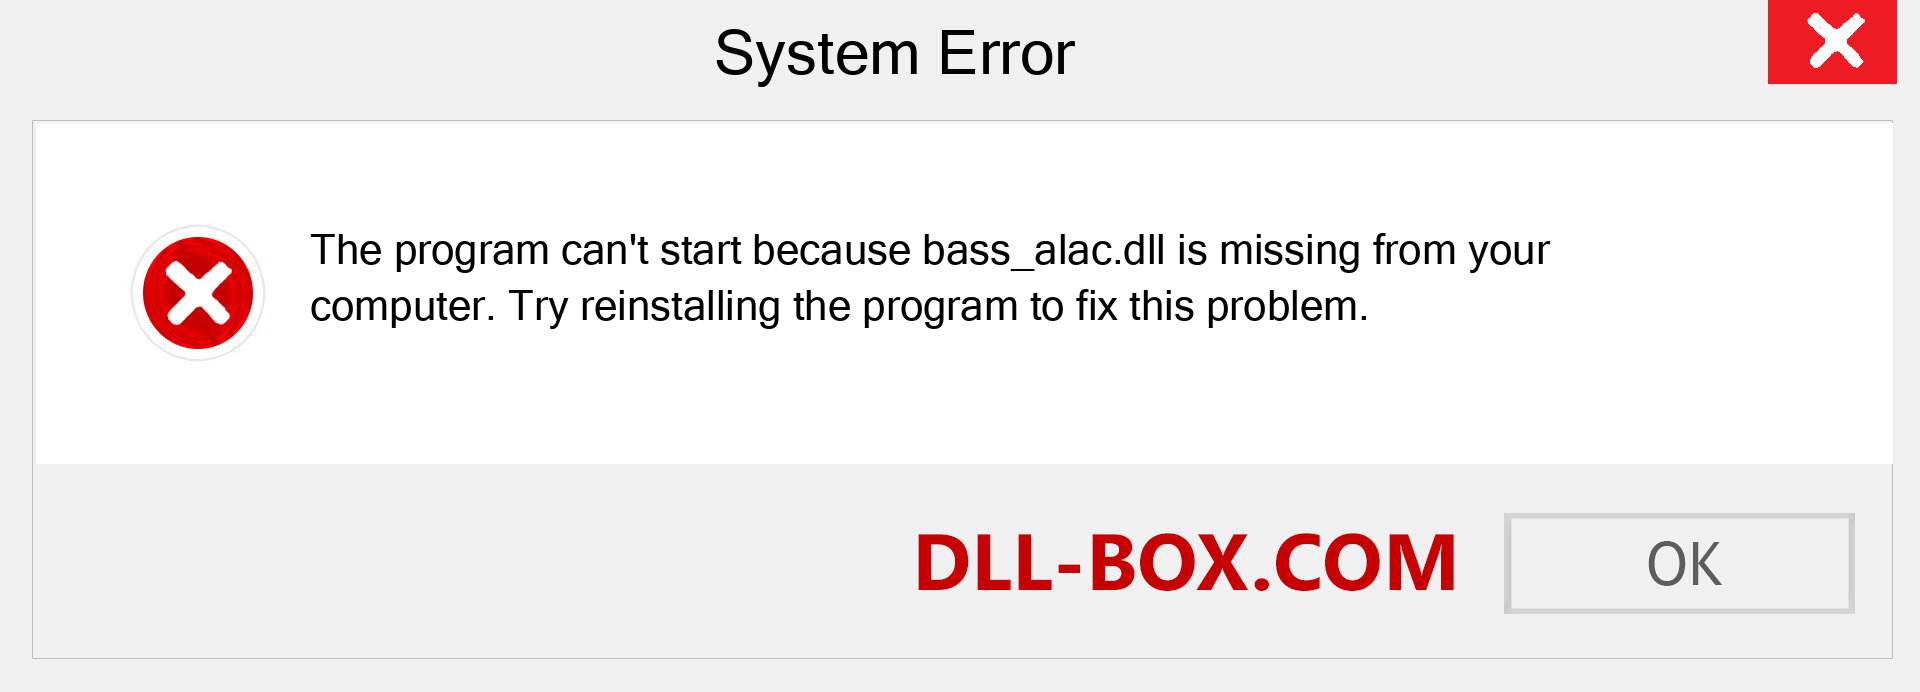  bass_alac.dll file is missing?. Download for Windows 7, 8, 10 - Fix  bass_alac dll Missing Error on Windows, photos, images